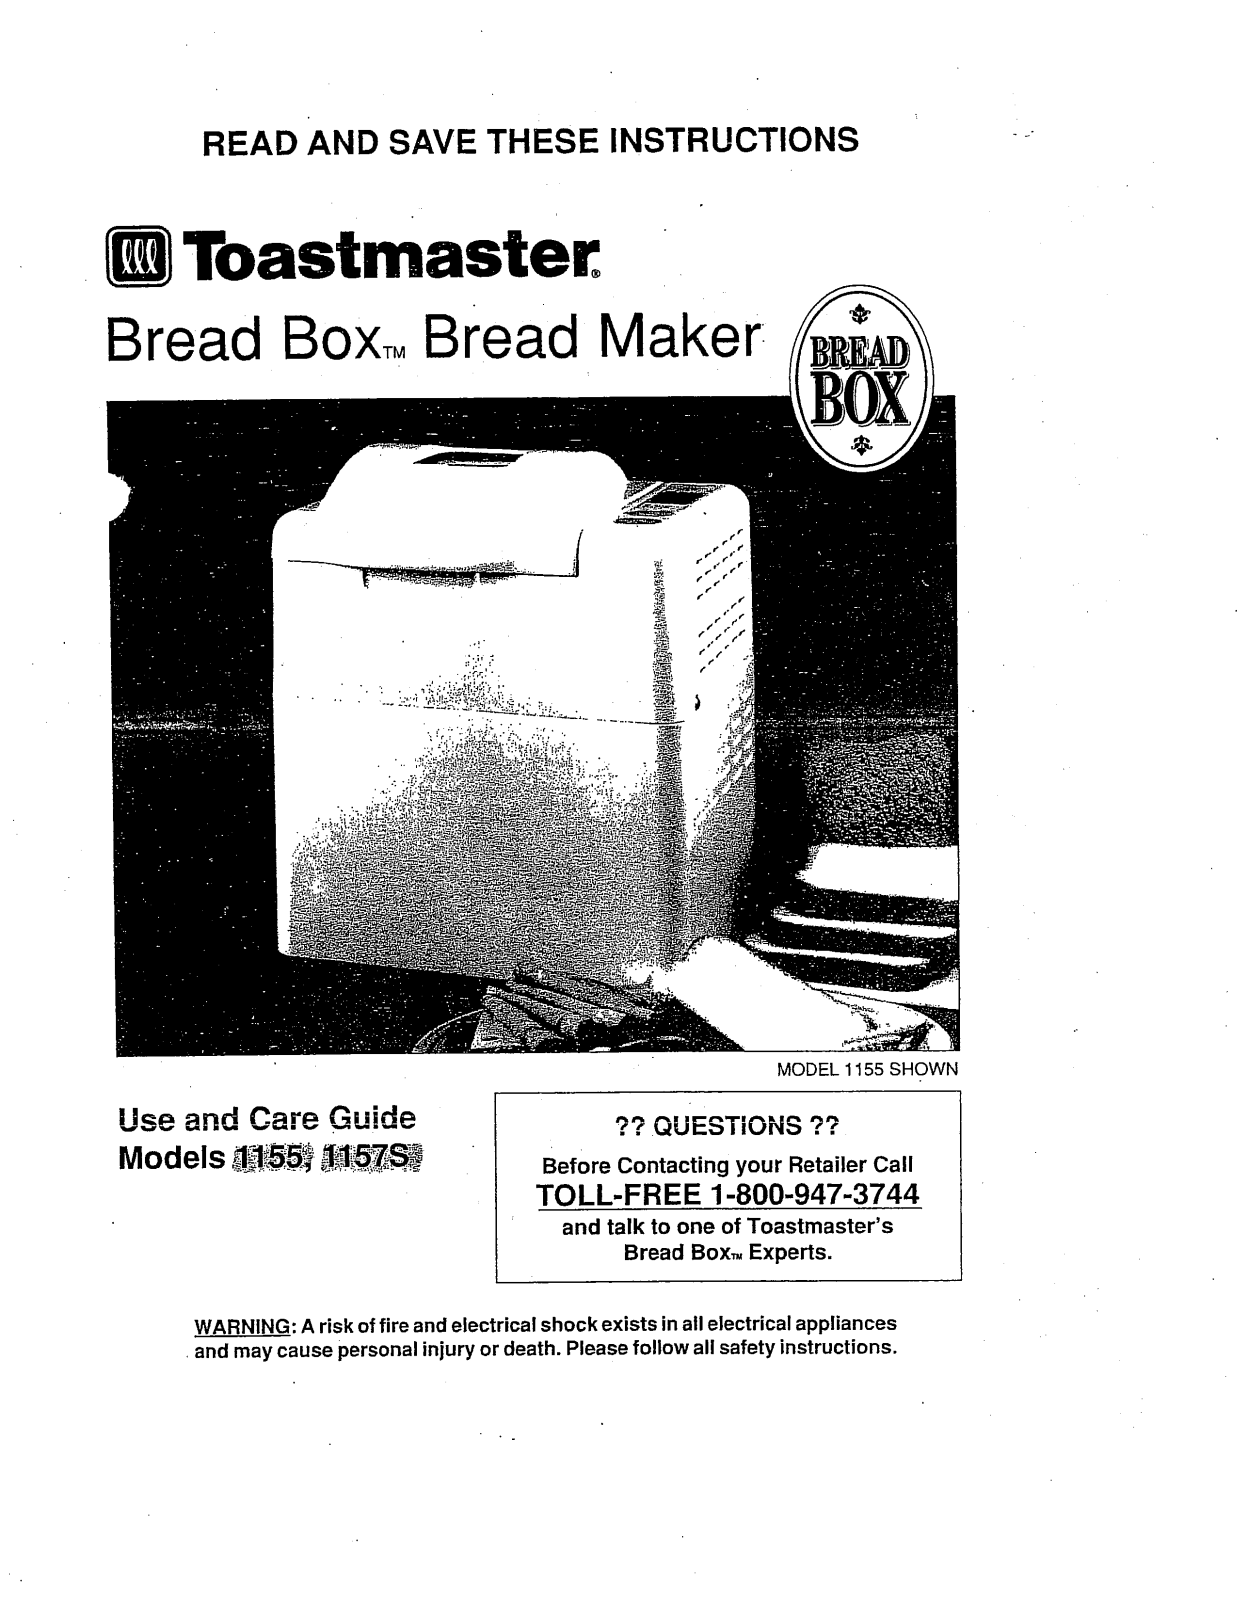 Toastmaster 1155, 1157S Use and Care Guide